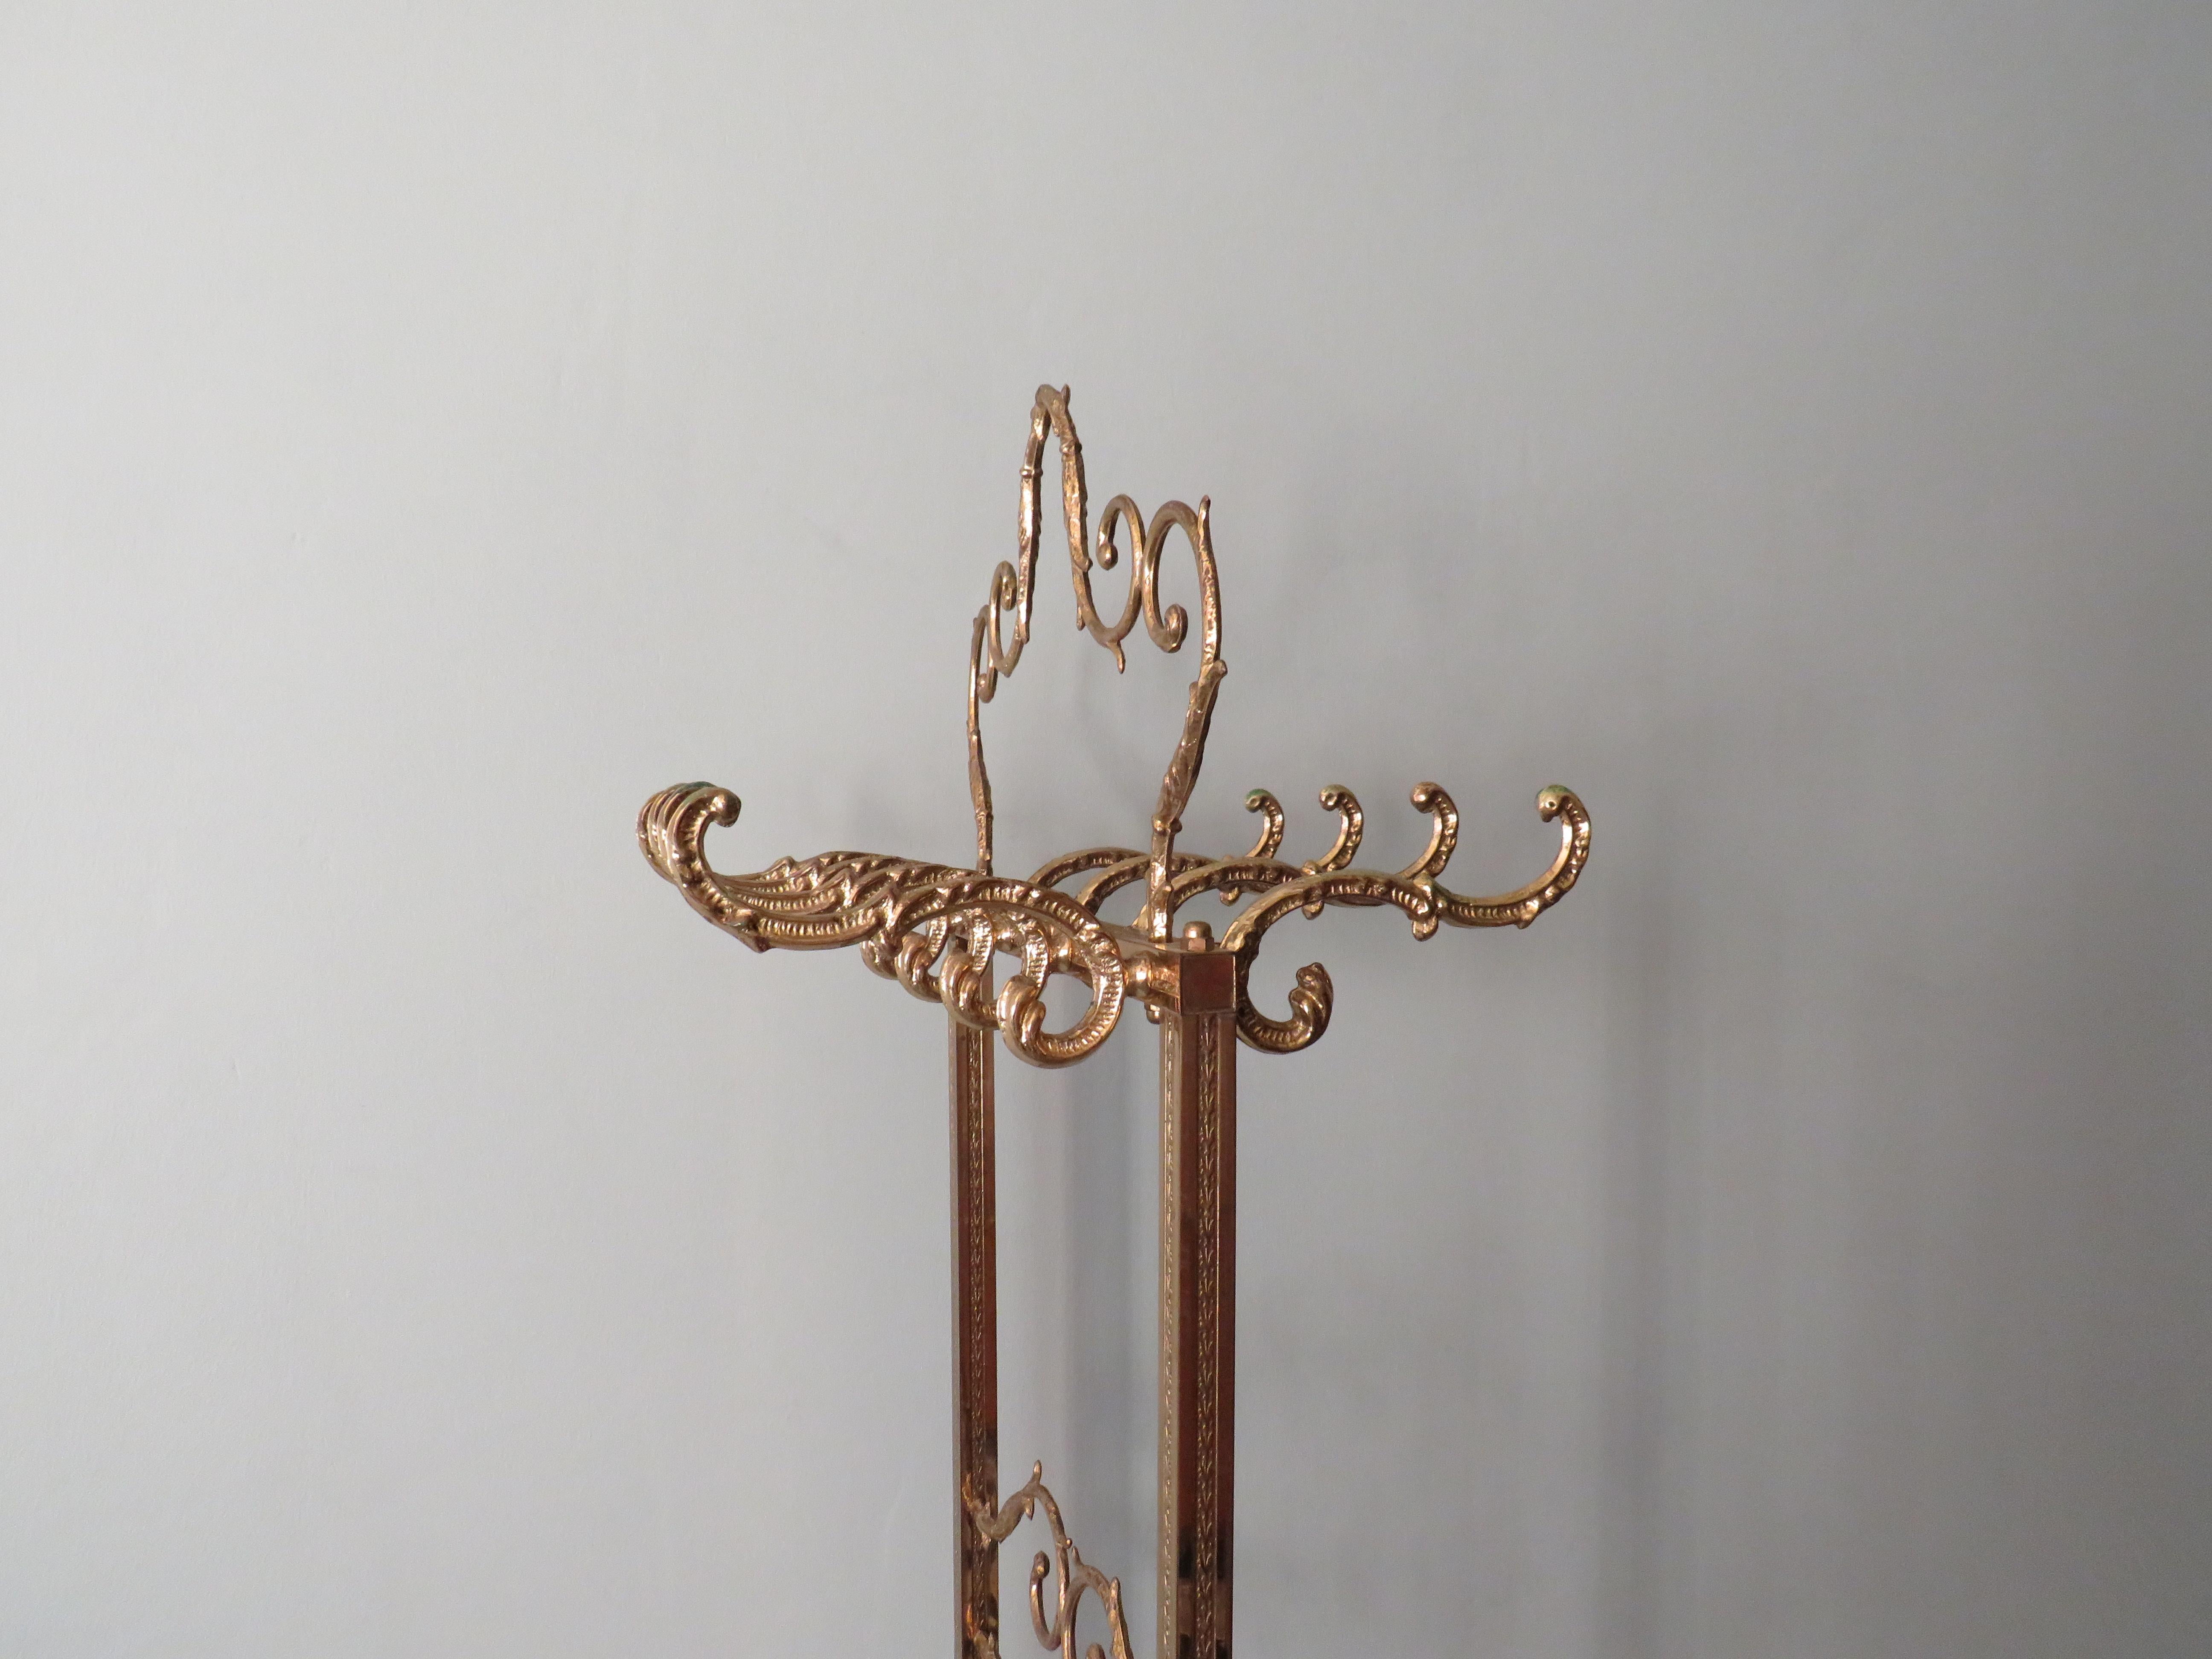 Remarkable double free standing coat rack in gold colored metal.
The coat rack is richly decorated with fish figures and can be used on both sides.
 